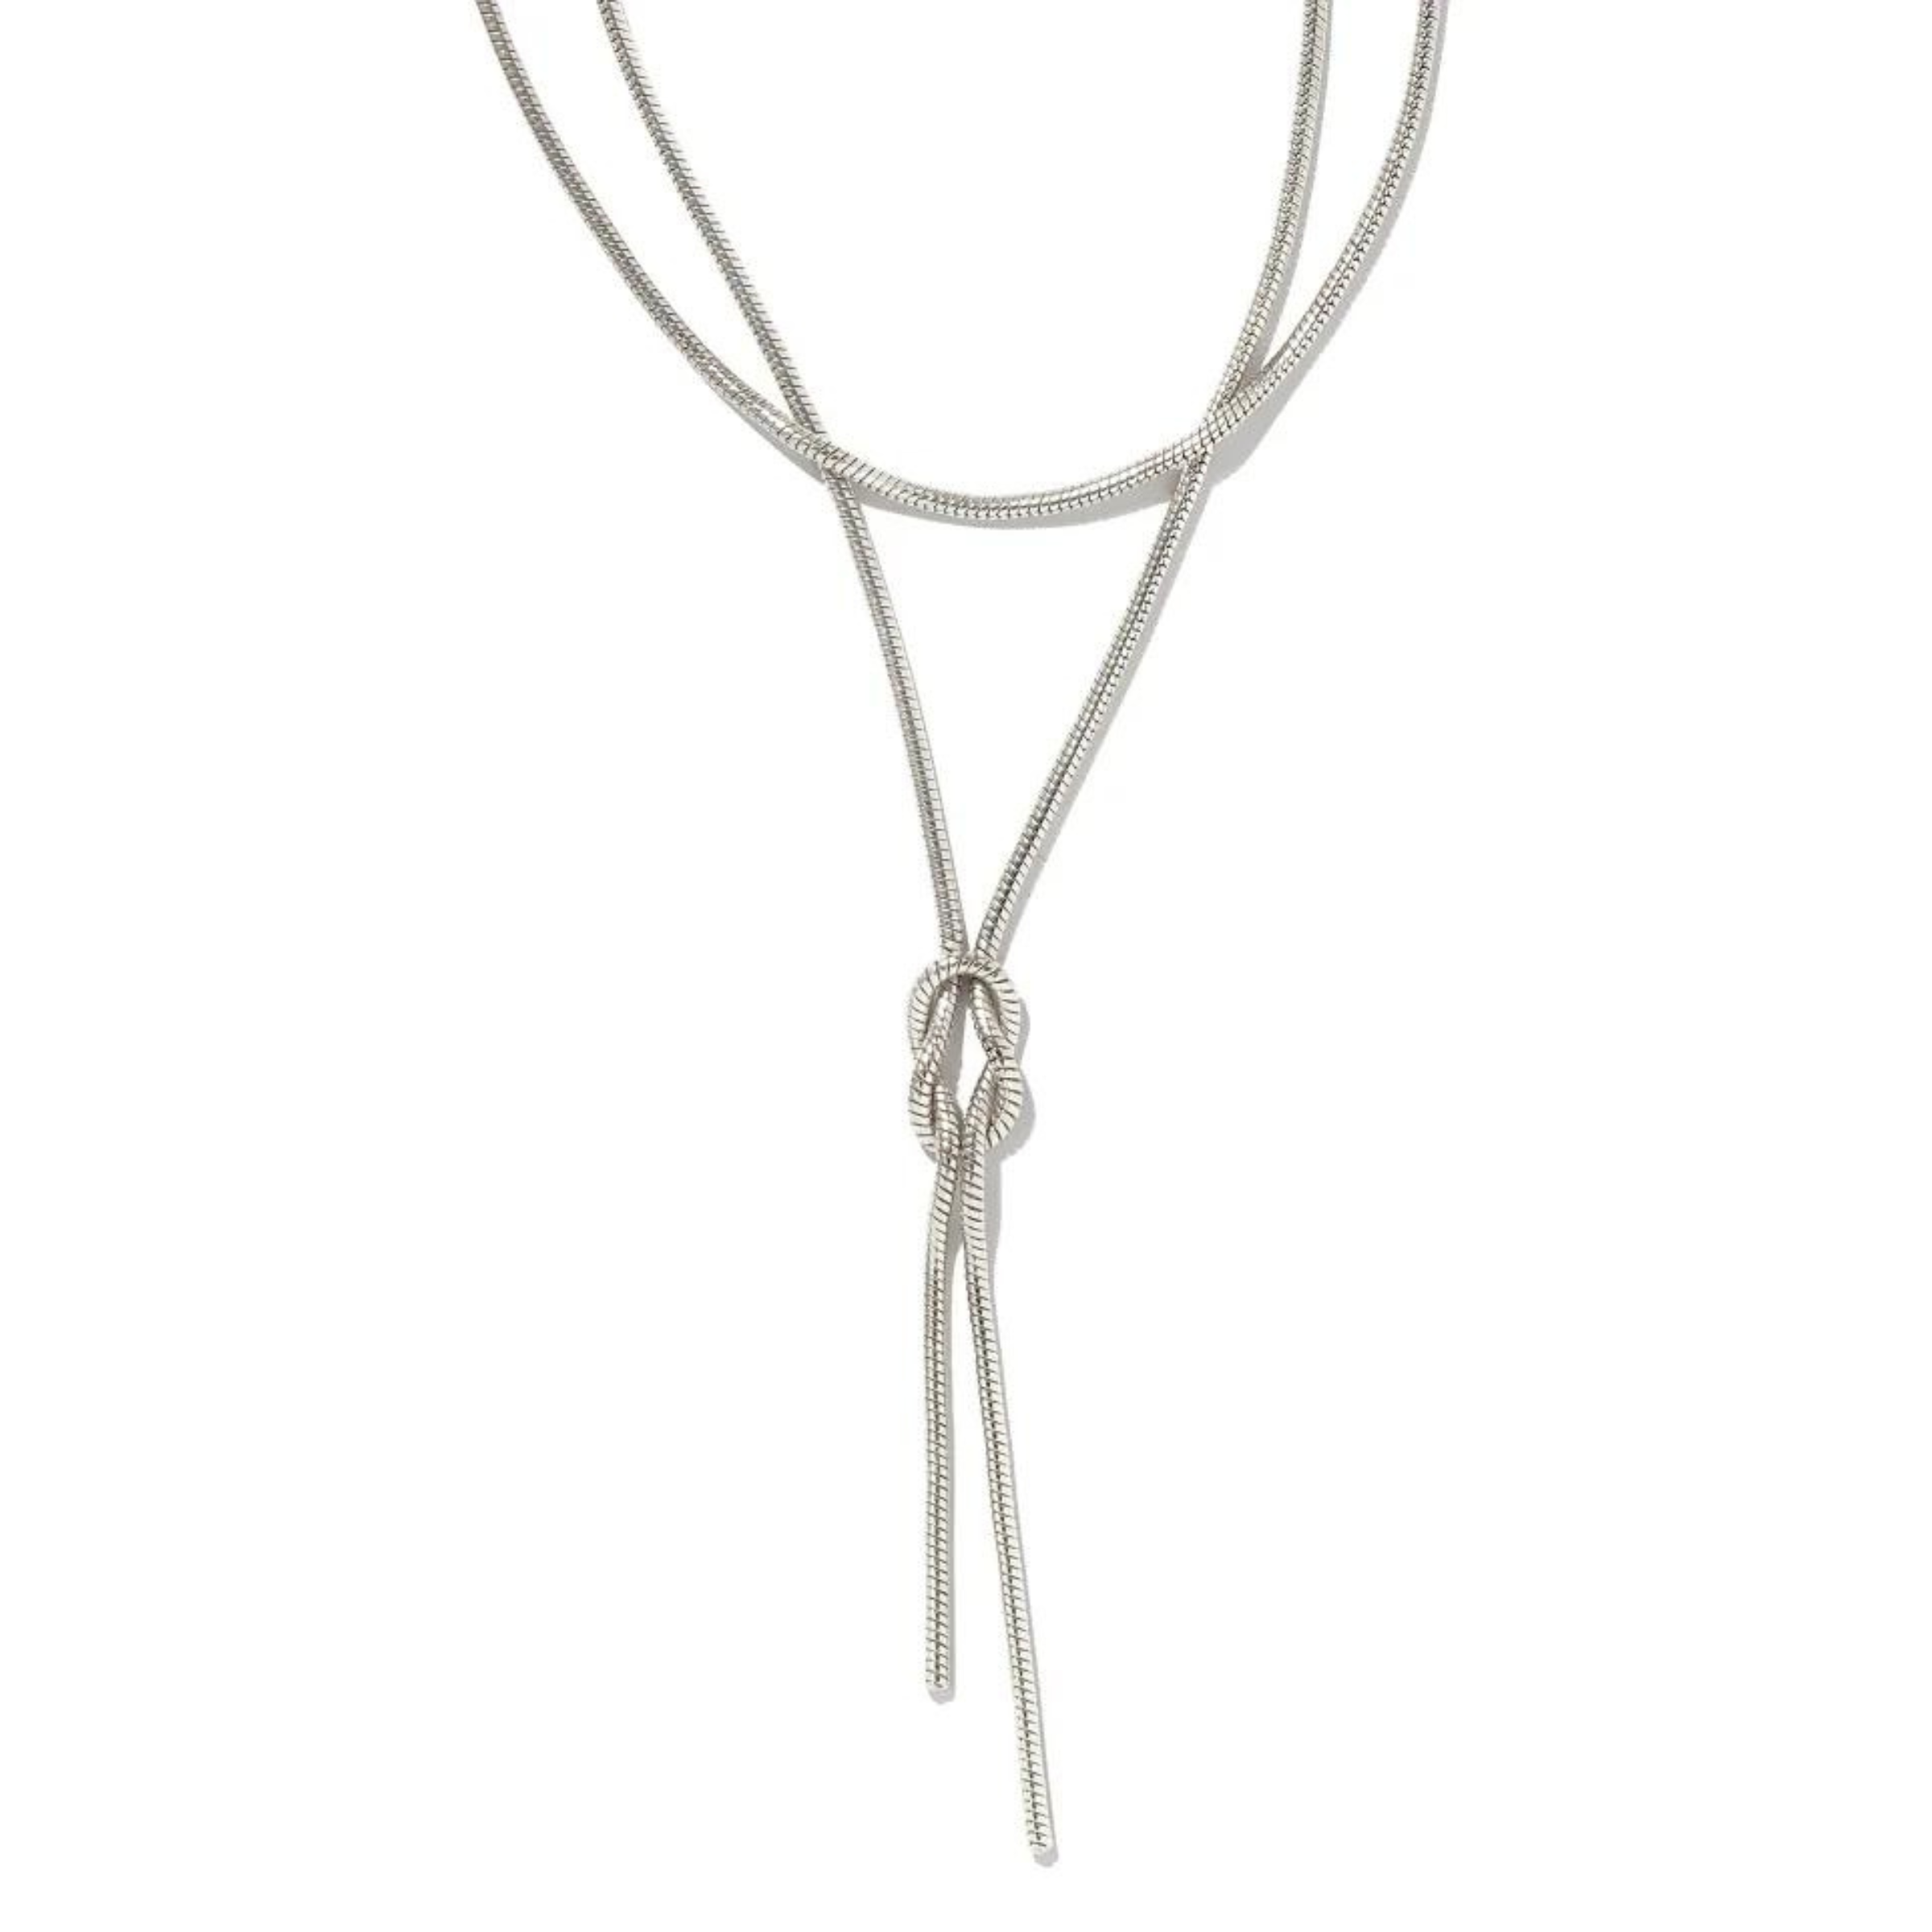 Silver necklace with two layers and has a tied knot towards the bottom. This necklace is pictured on a white background. 